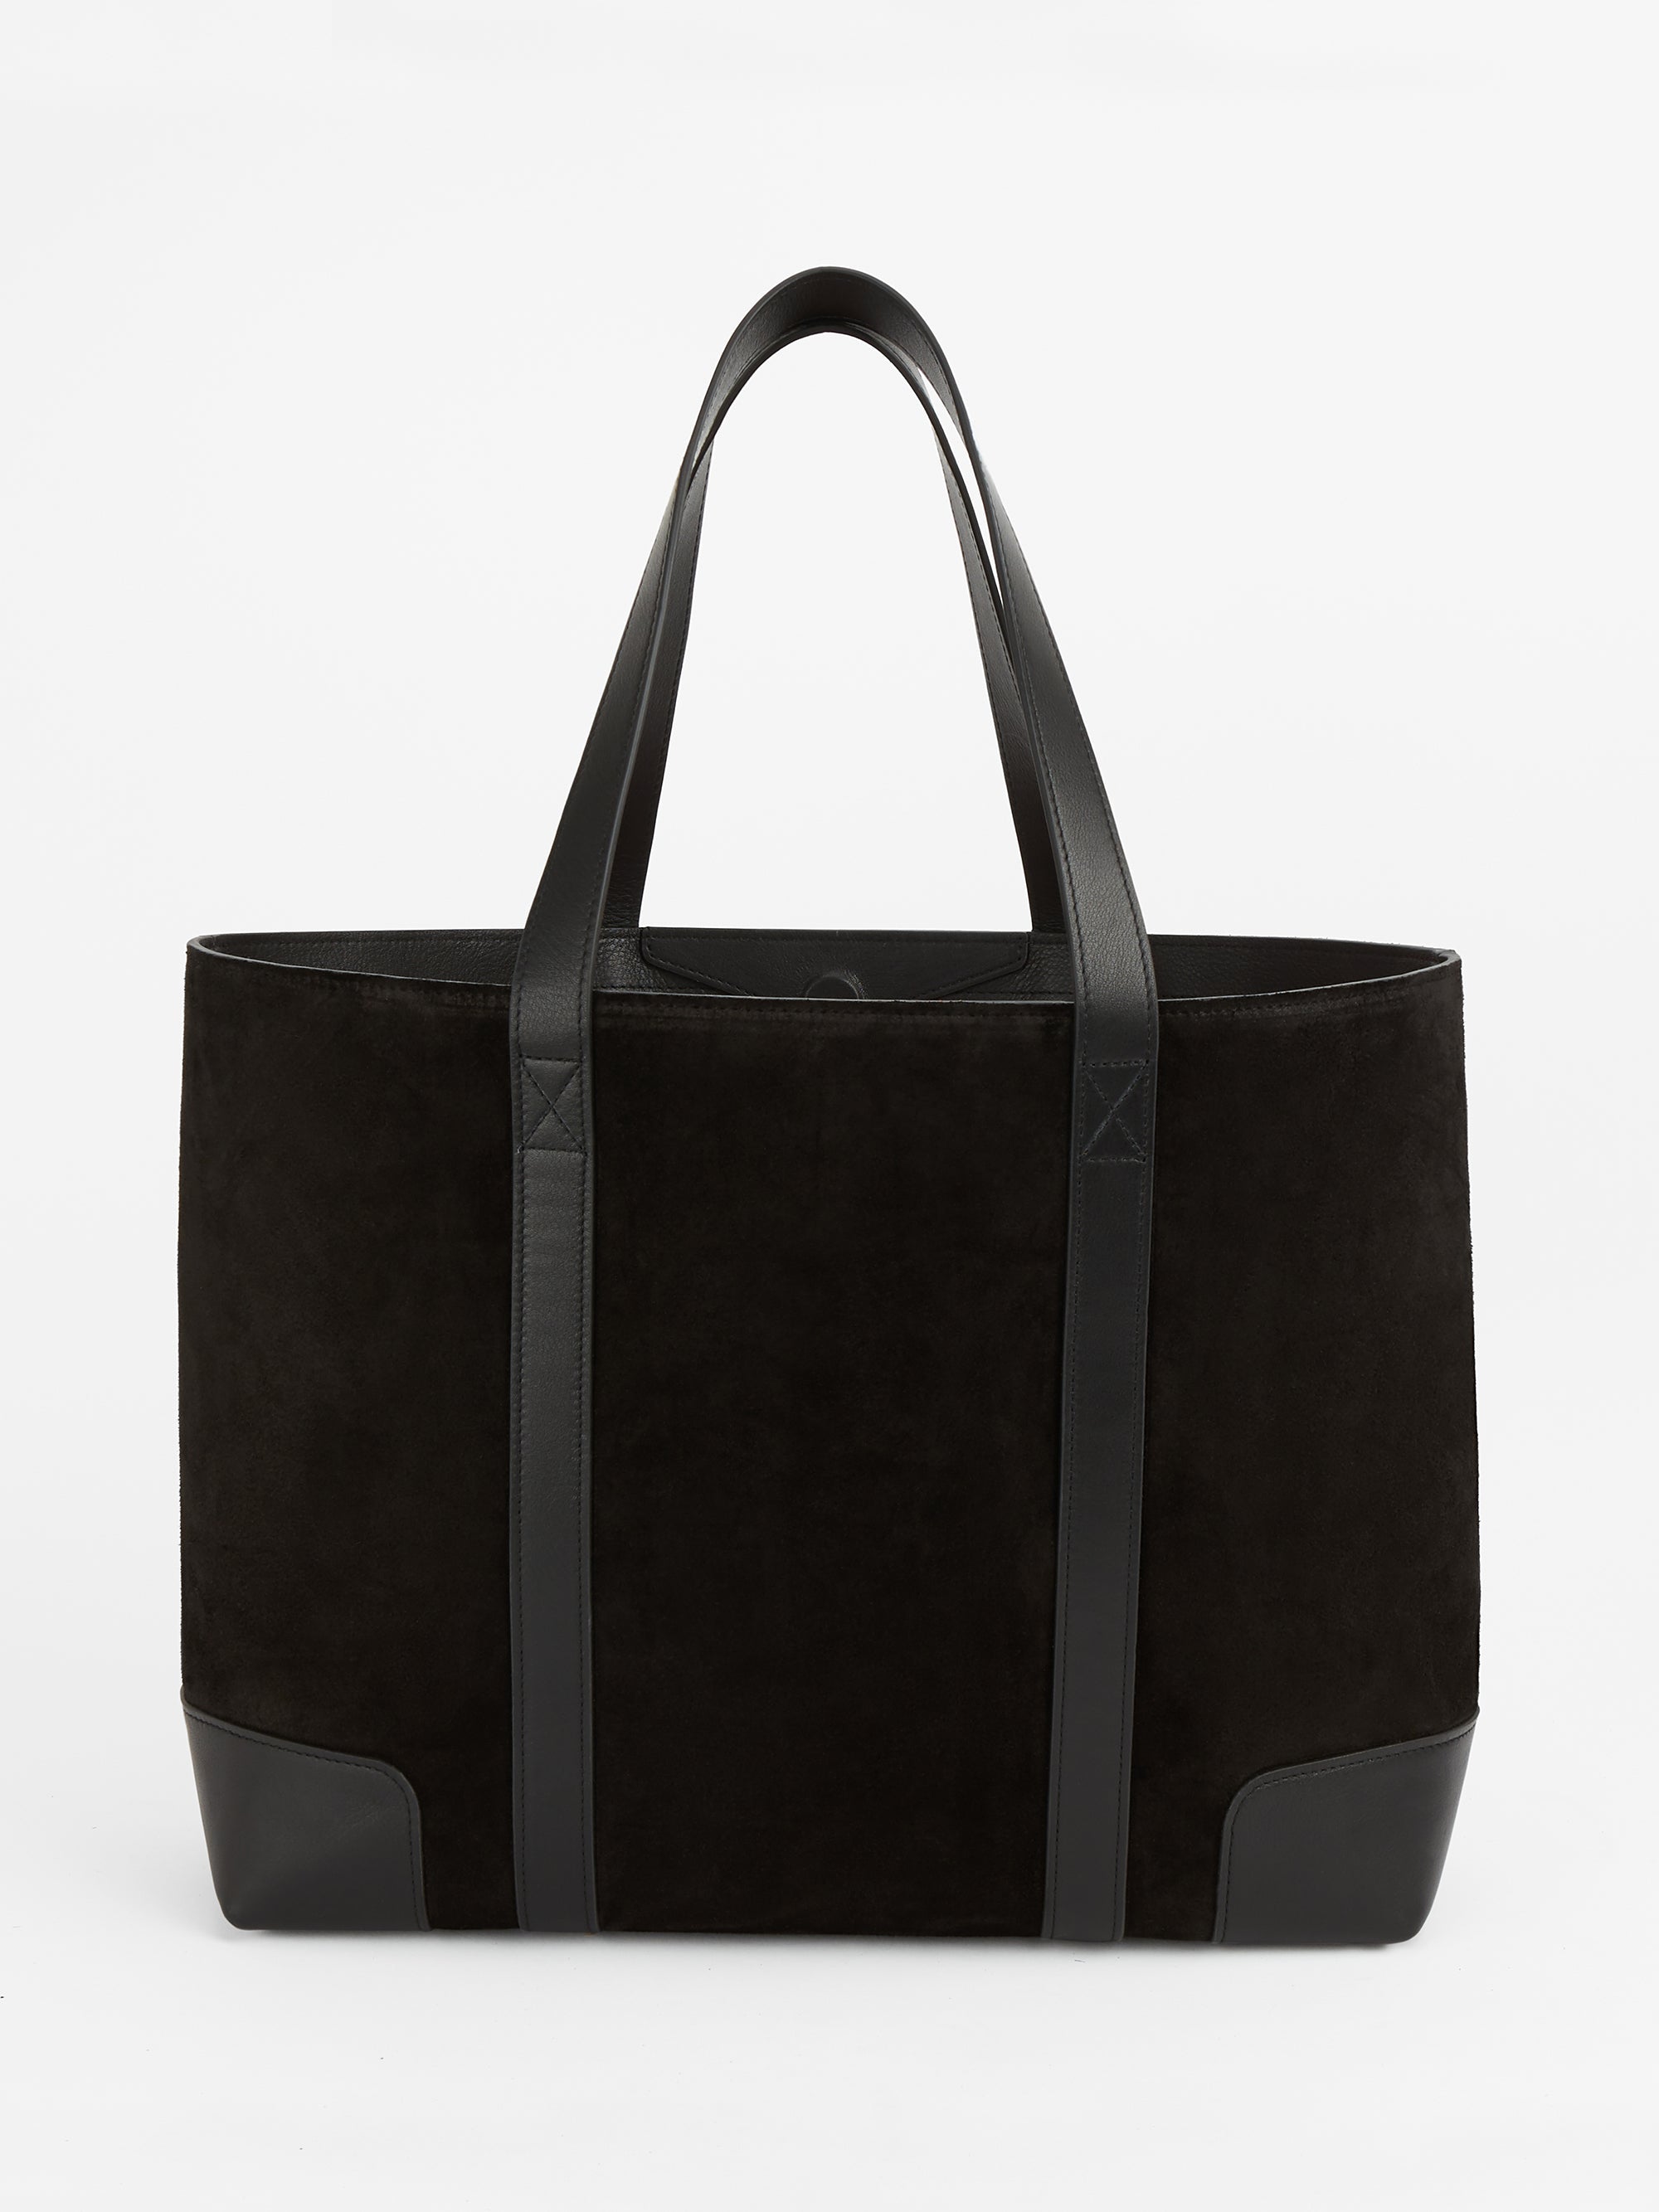 Letter 'M' - The Suede Tote Bag, Black